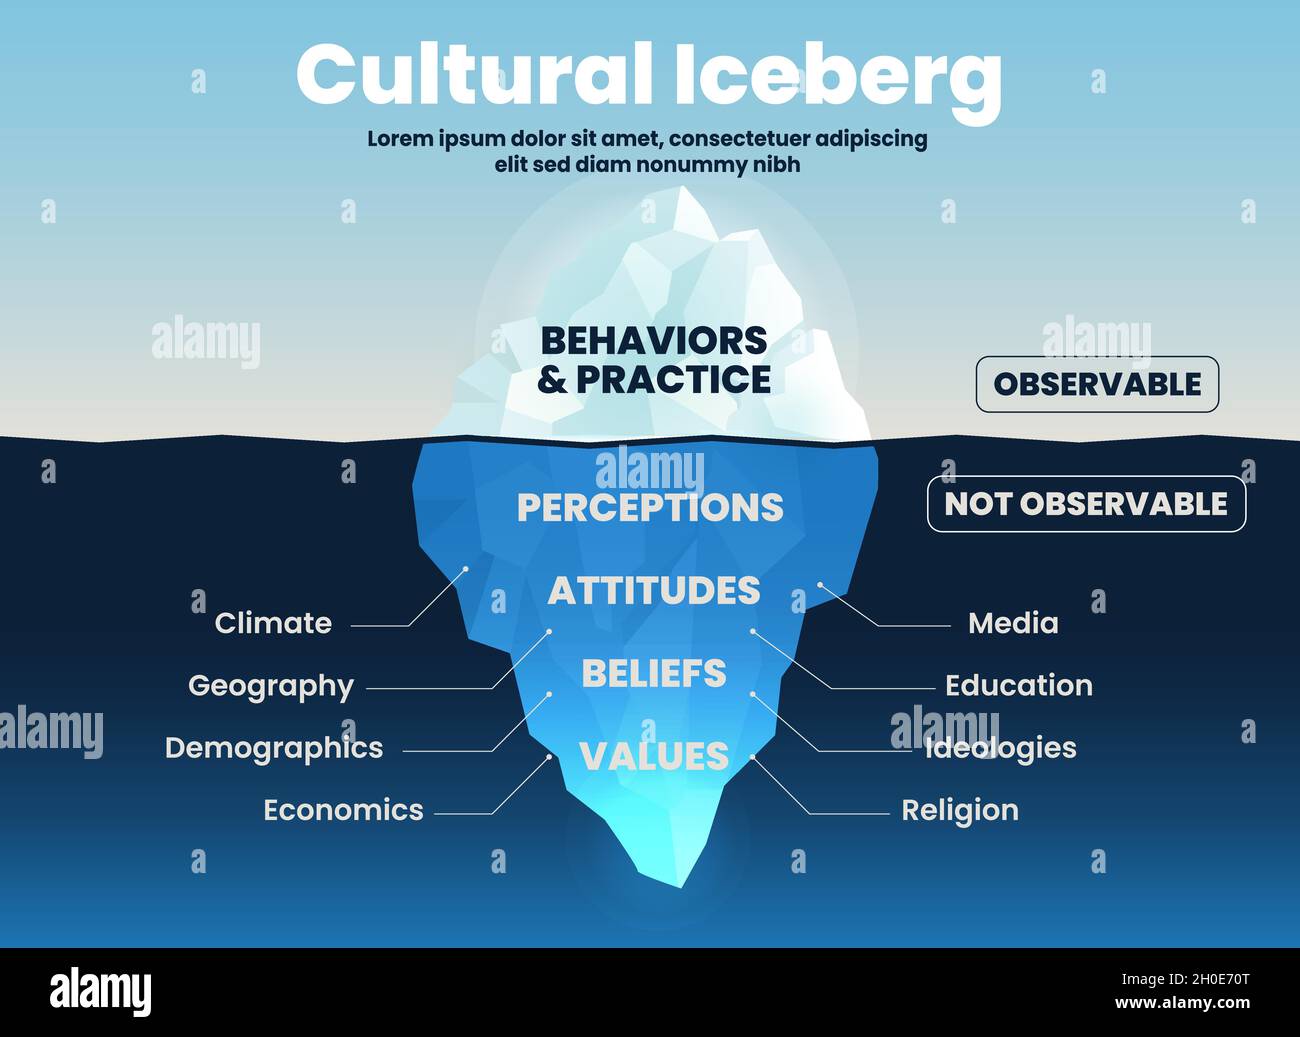 Cultural behavior and practices iceberg on surface over ocean can be ...